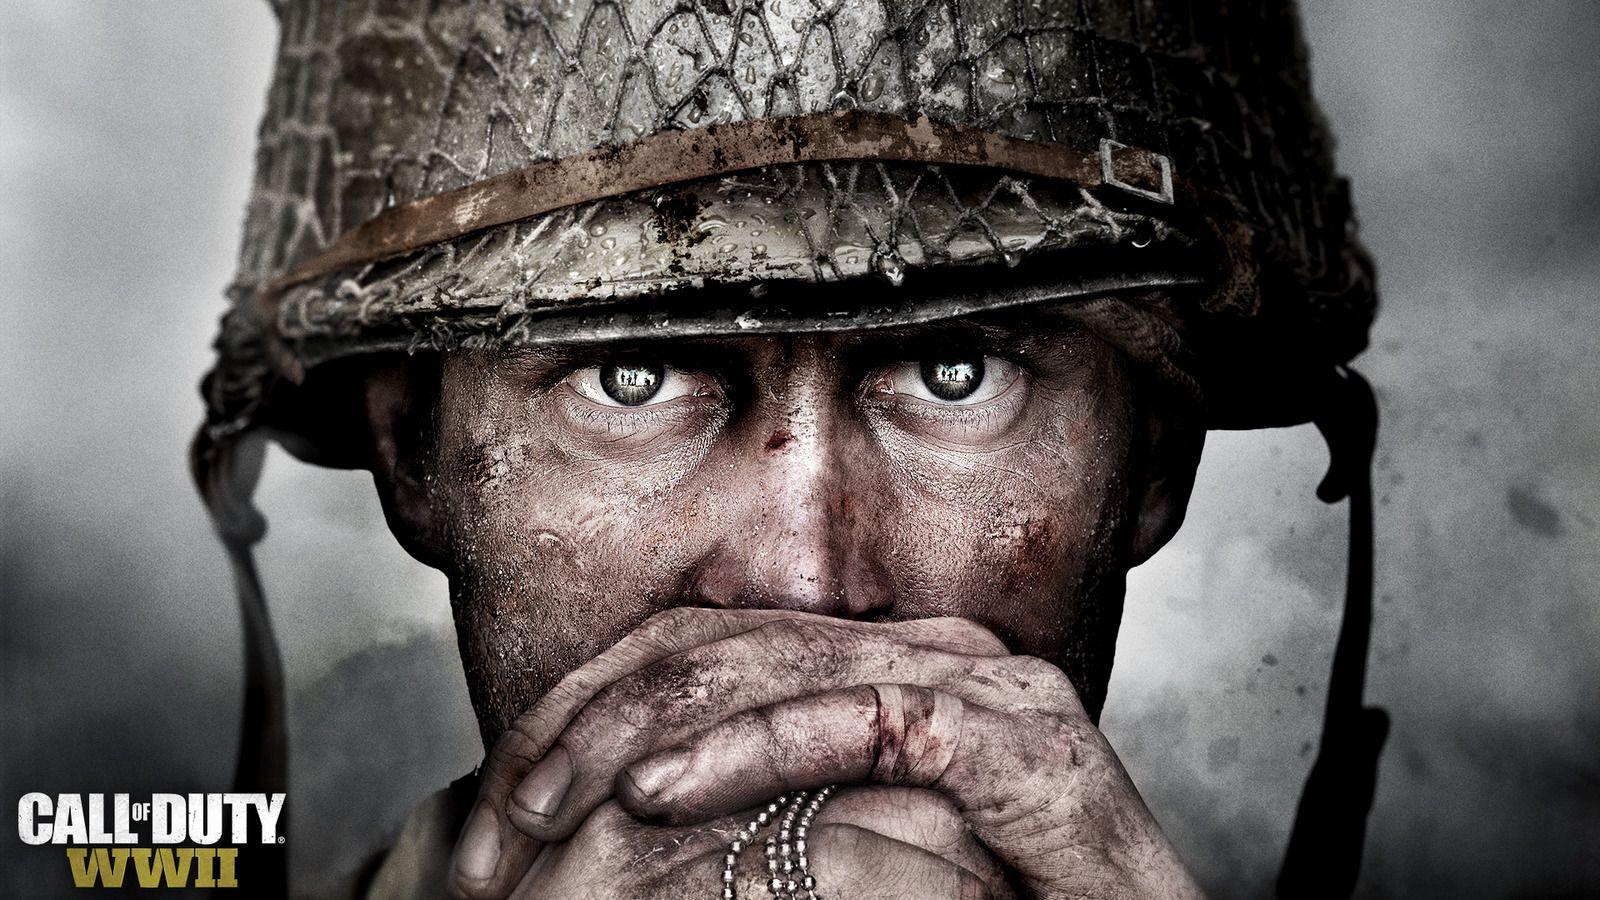 Call of Duty WWII Computer Wallpaper 61208 1600x900 px